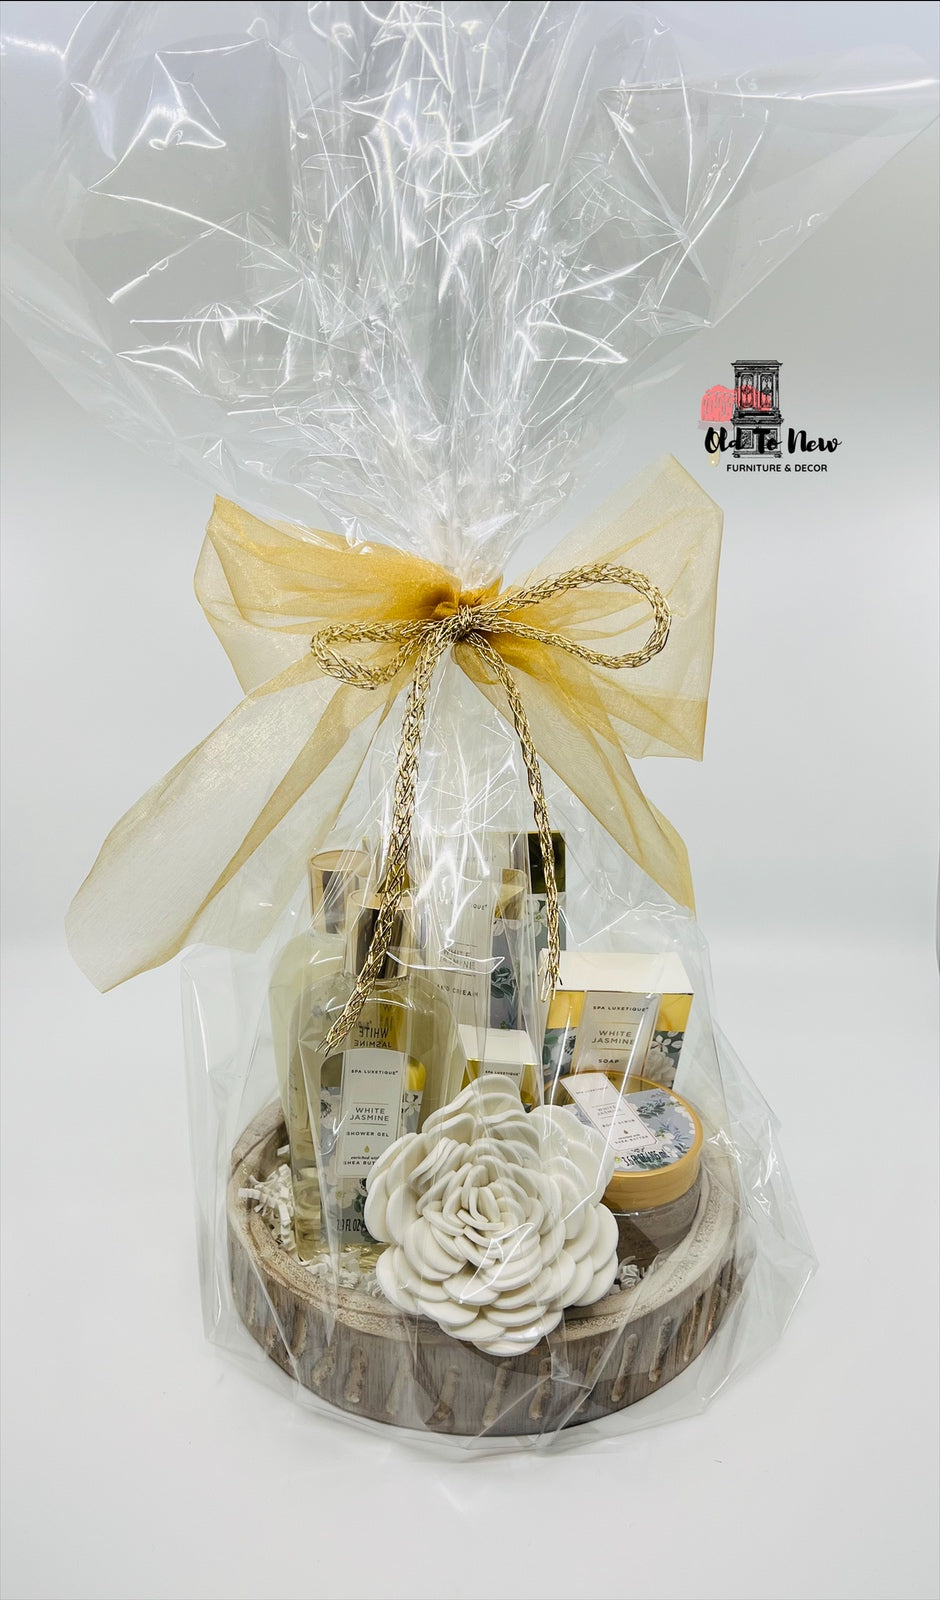 Jasmine Spa Gift Basket,  white and gold gift basket, Mothers Day Gift, Housewarming Gift, Birthday Gift, Old to New Furniture & Decor, A Gift for Her.